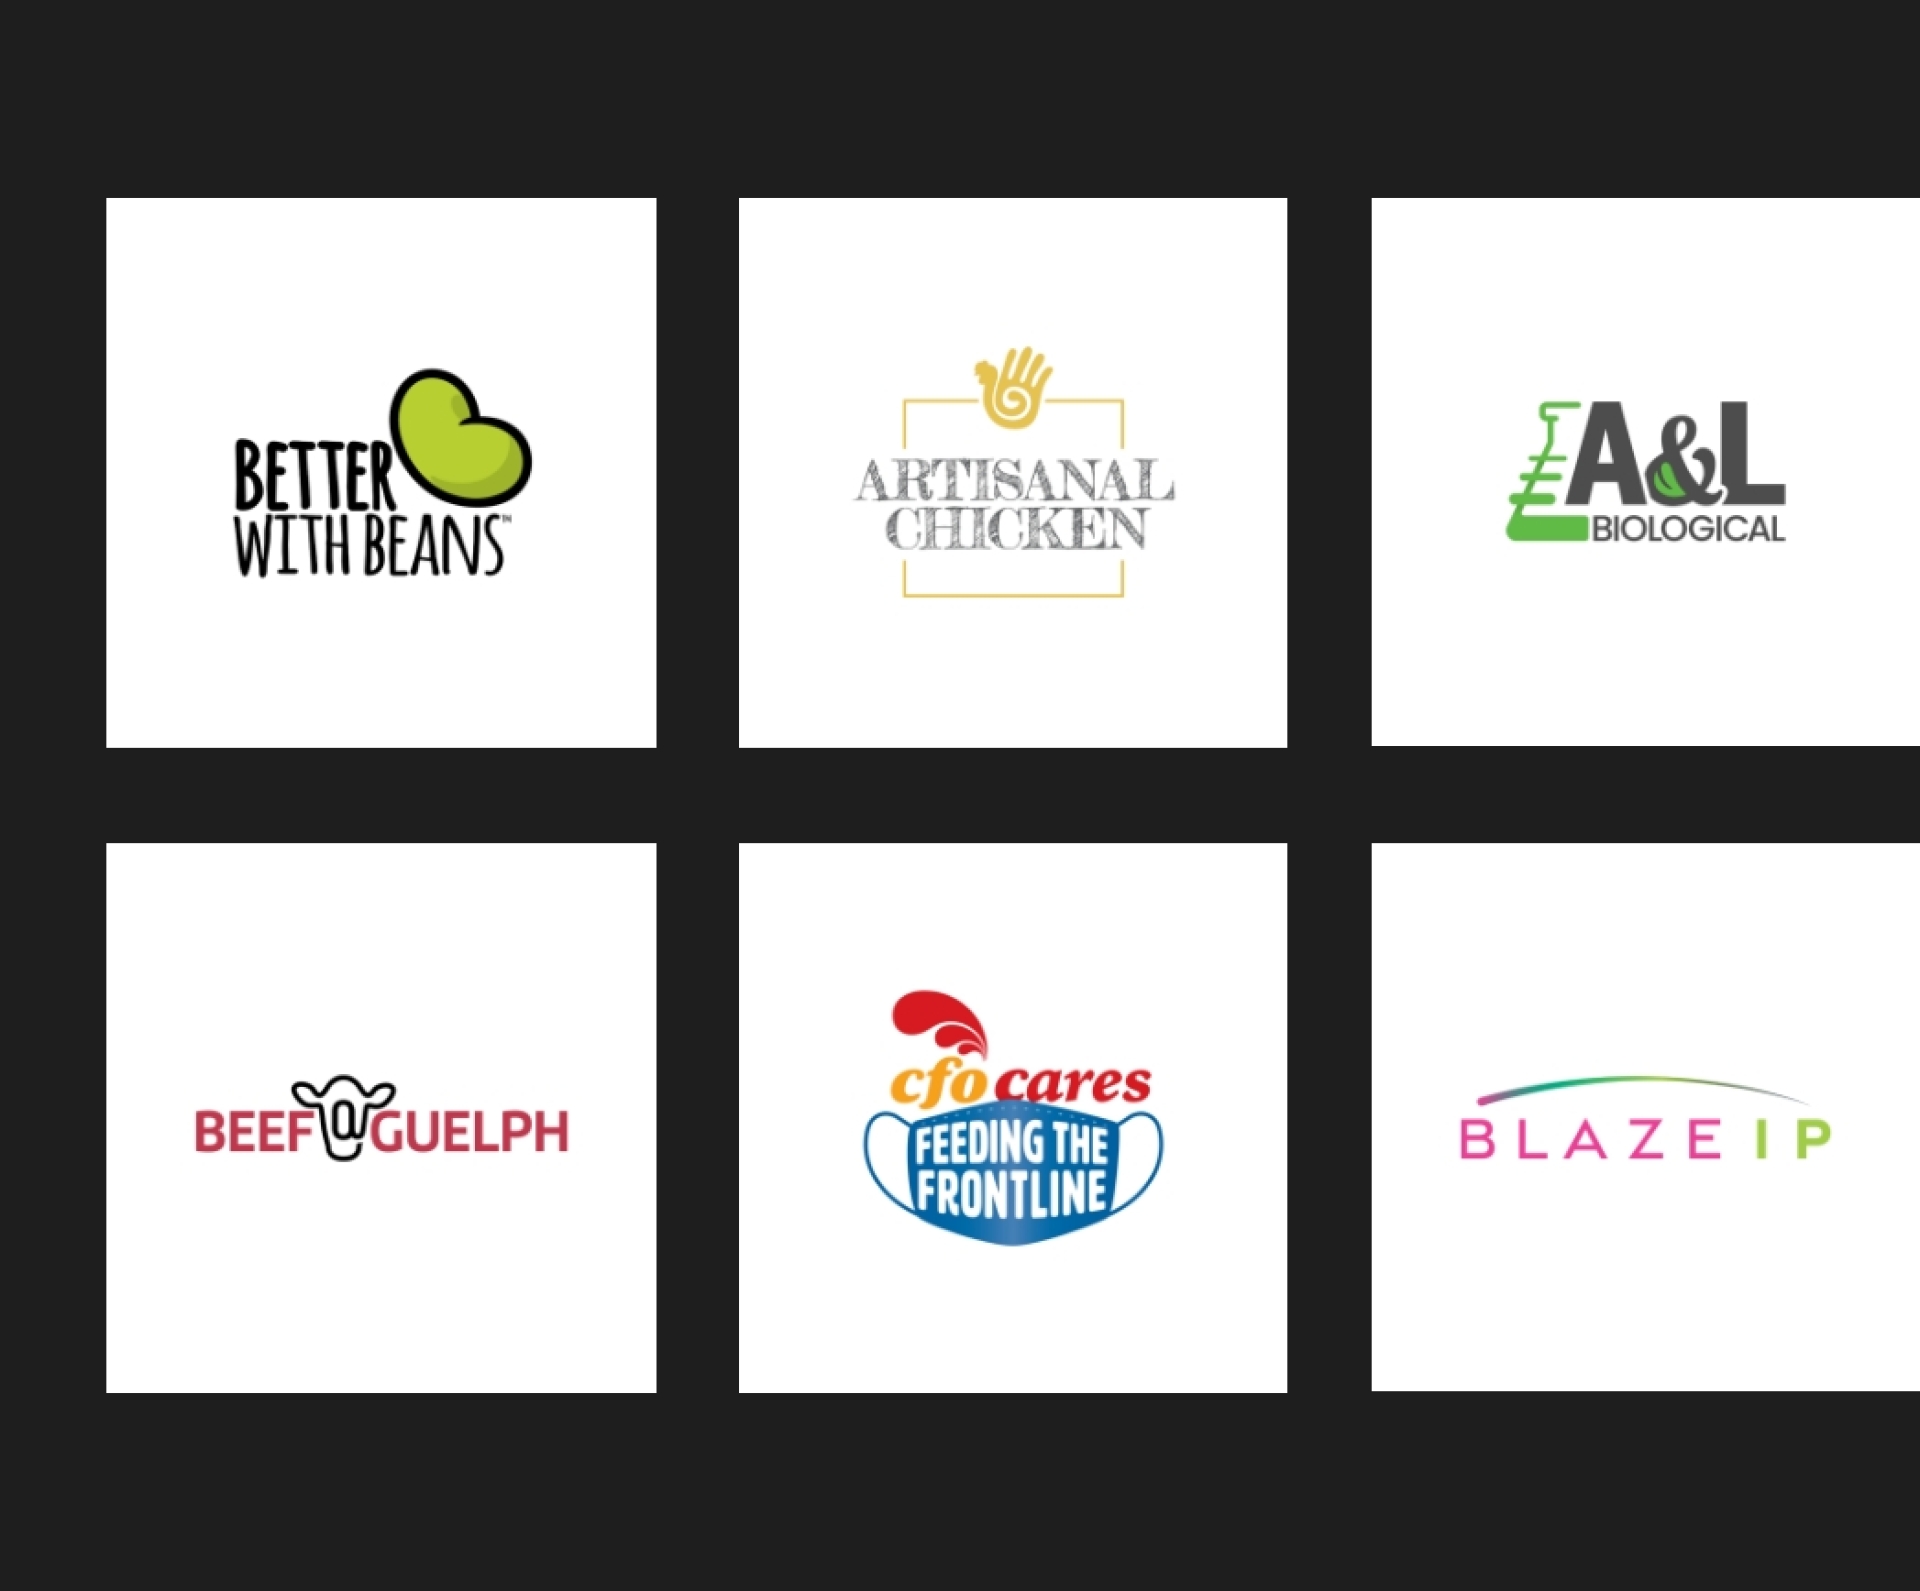 A collage with Better With Beans logo design, Artisanal Chicken logo design, A&L Biological logo design, Beef Guelph logo design, CFO Cares logo design and Blaze IP logo design